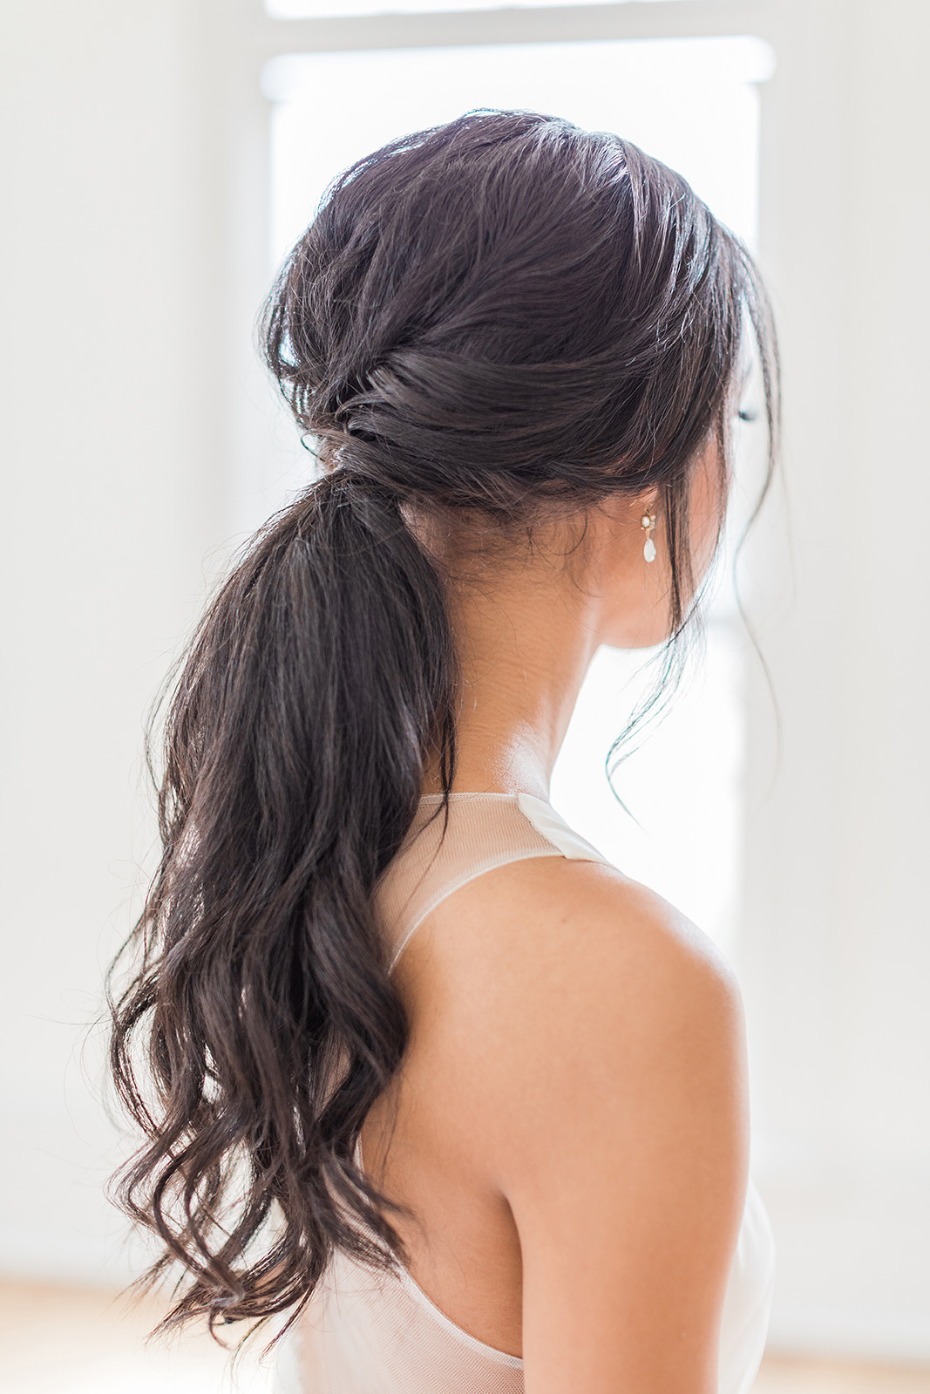 Classic Wedding Hair and Makeup Looks We're Loving